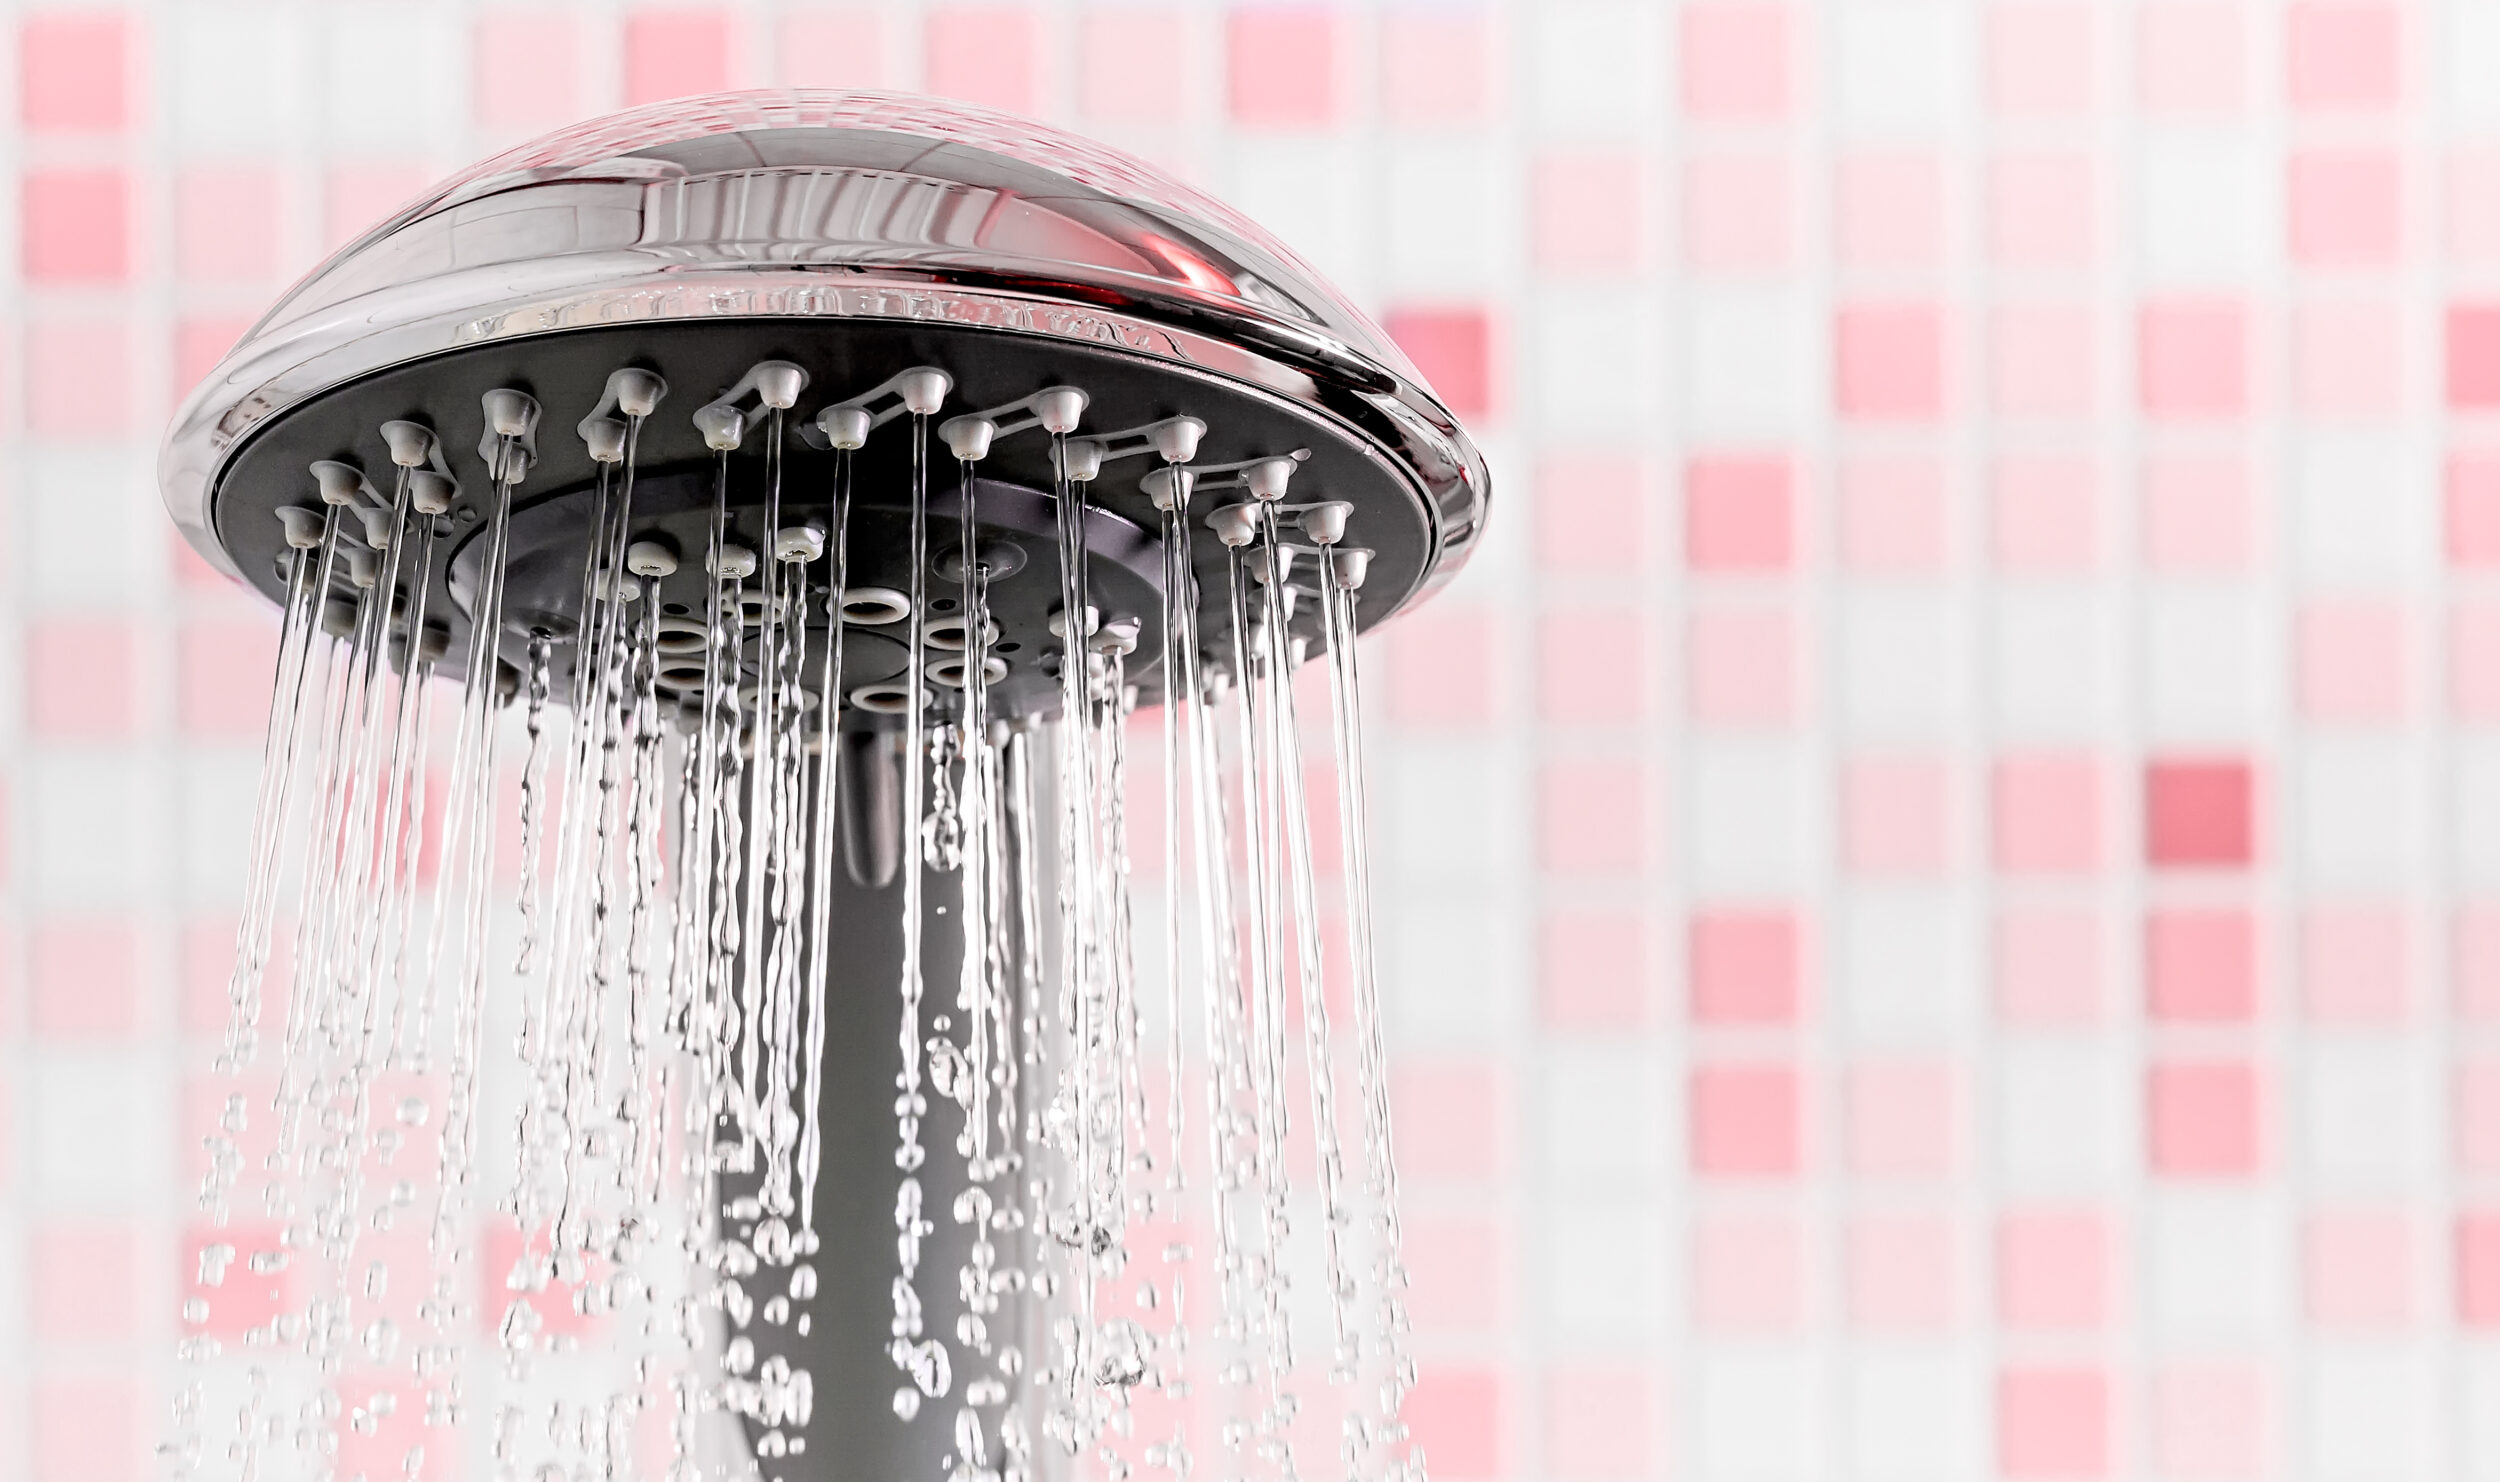 Modern Shower head with running water in pink bathroom. Copy space